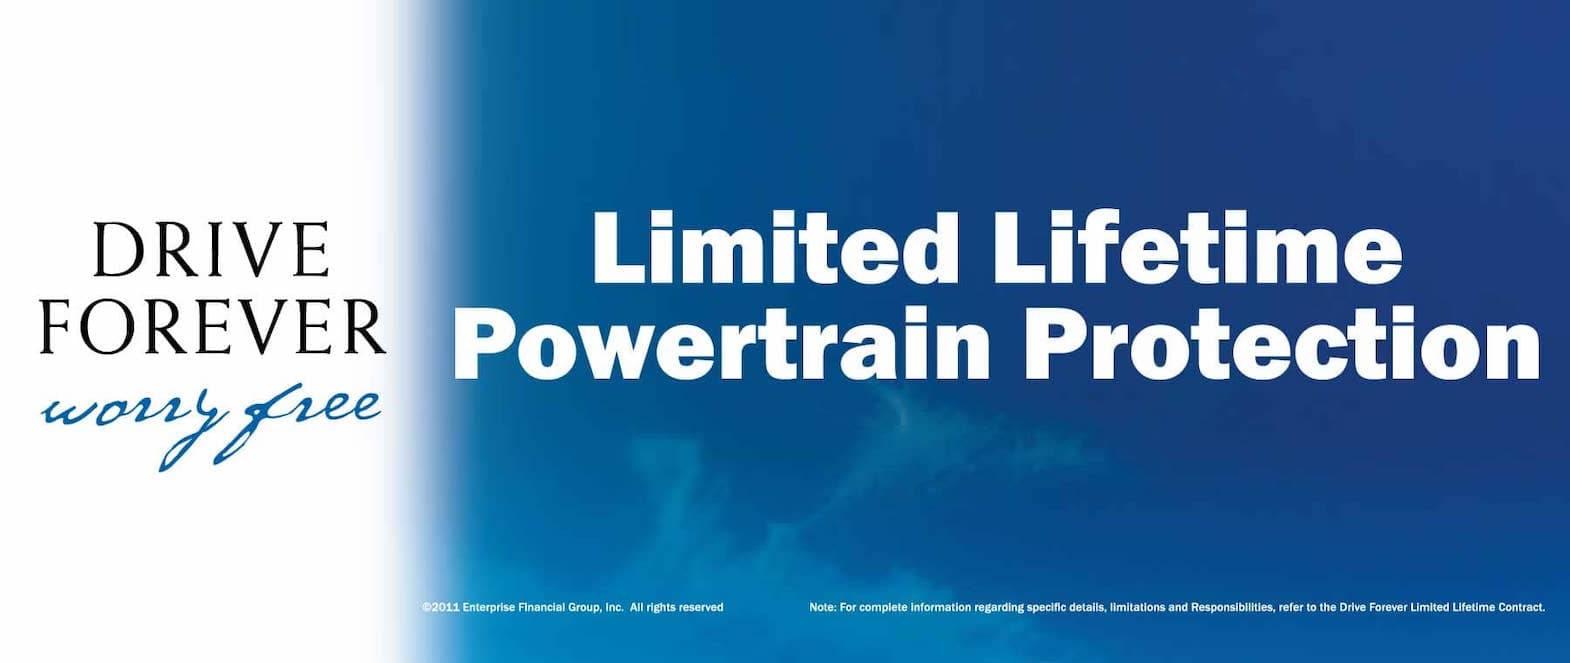 Limited Lifetime Powertrain protection